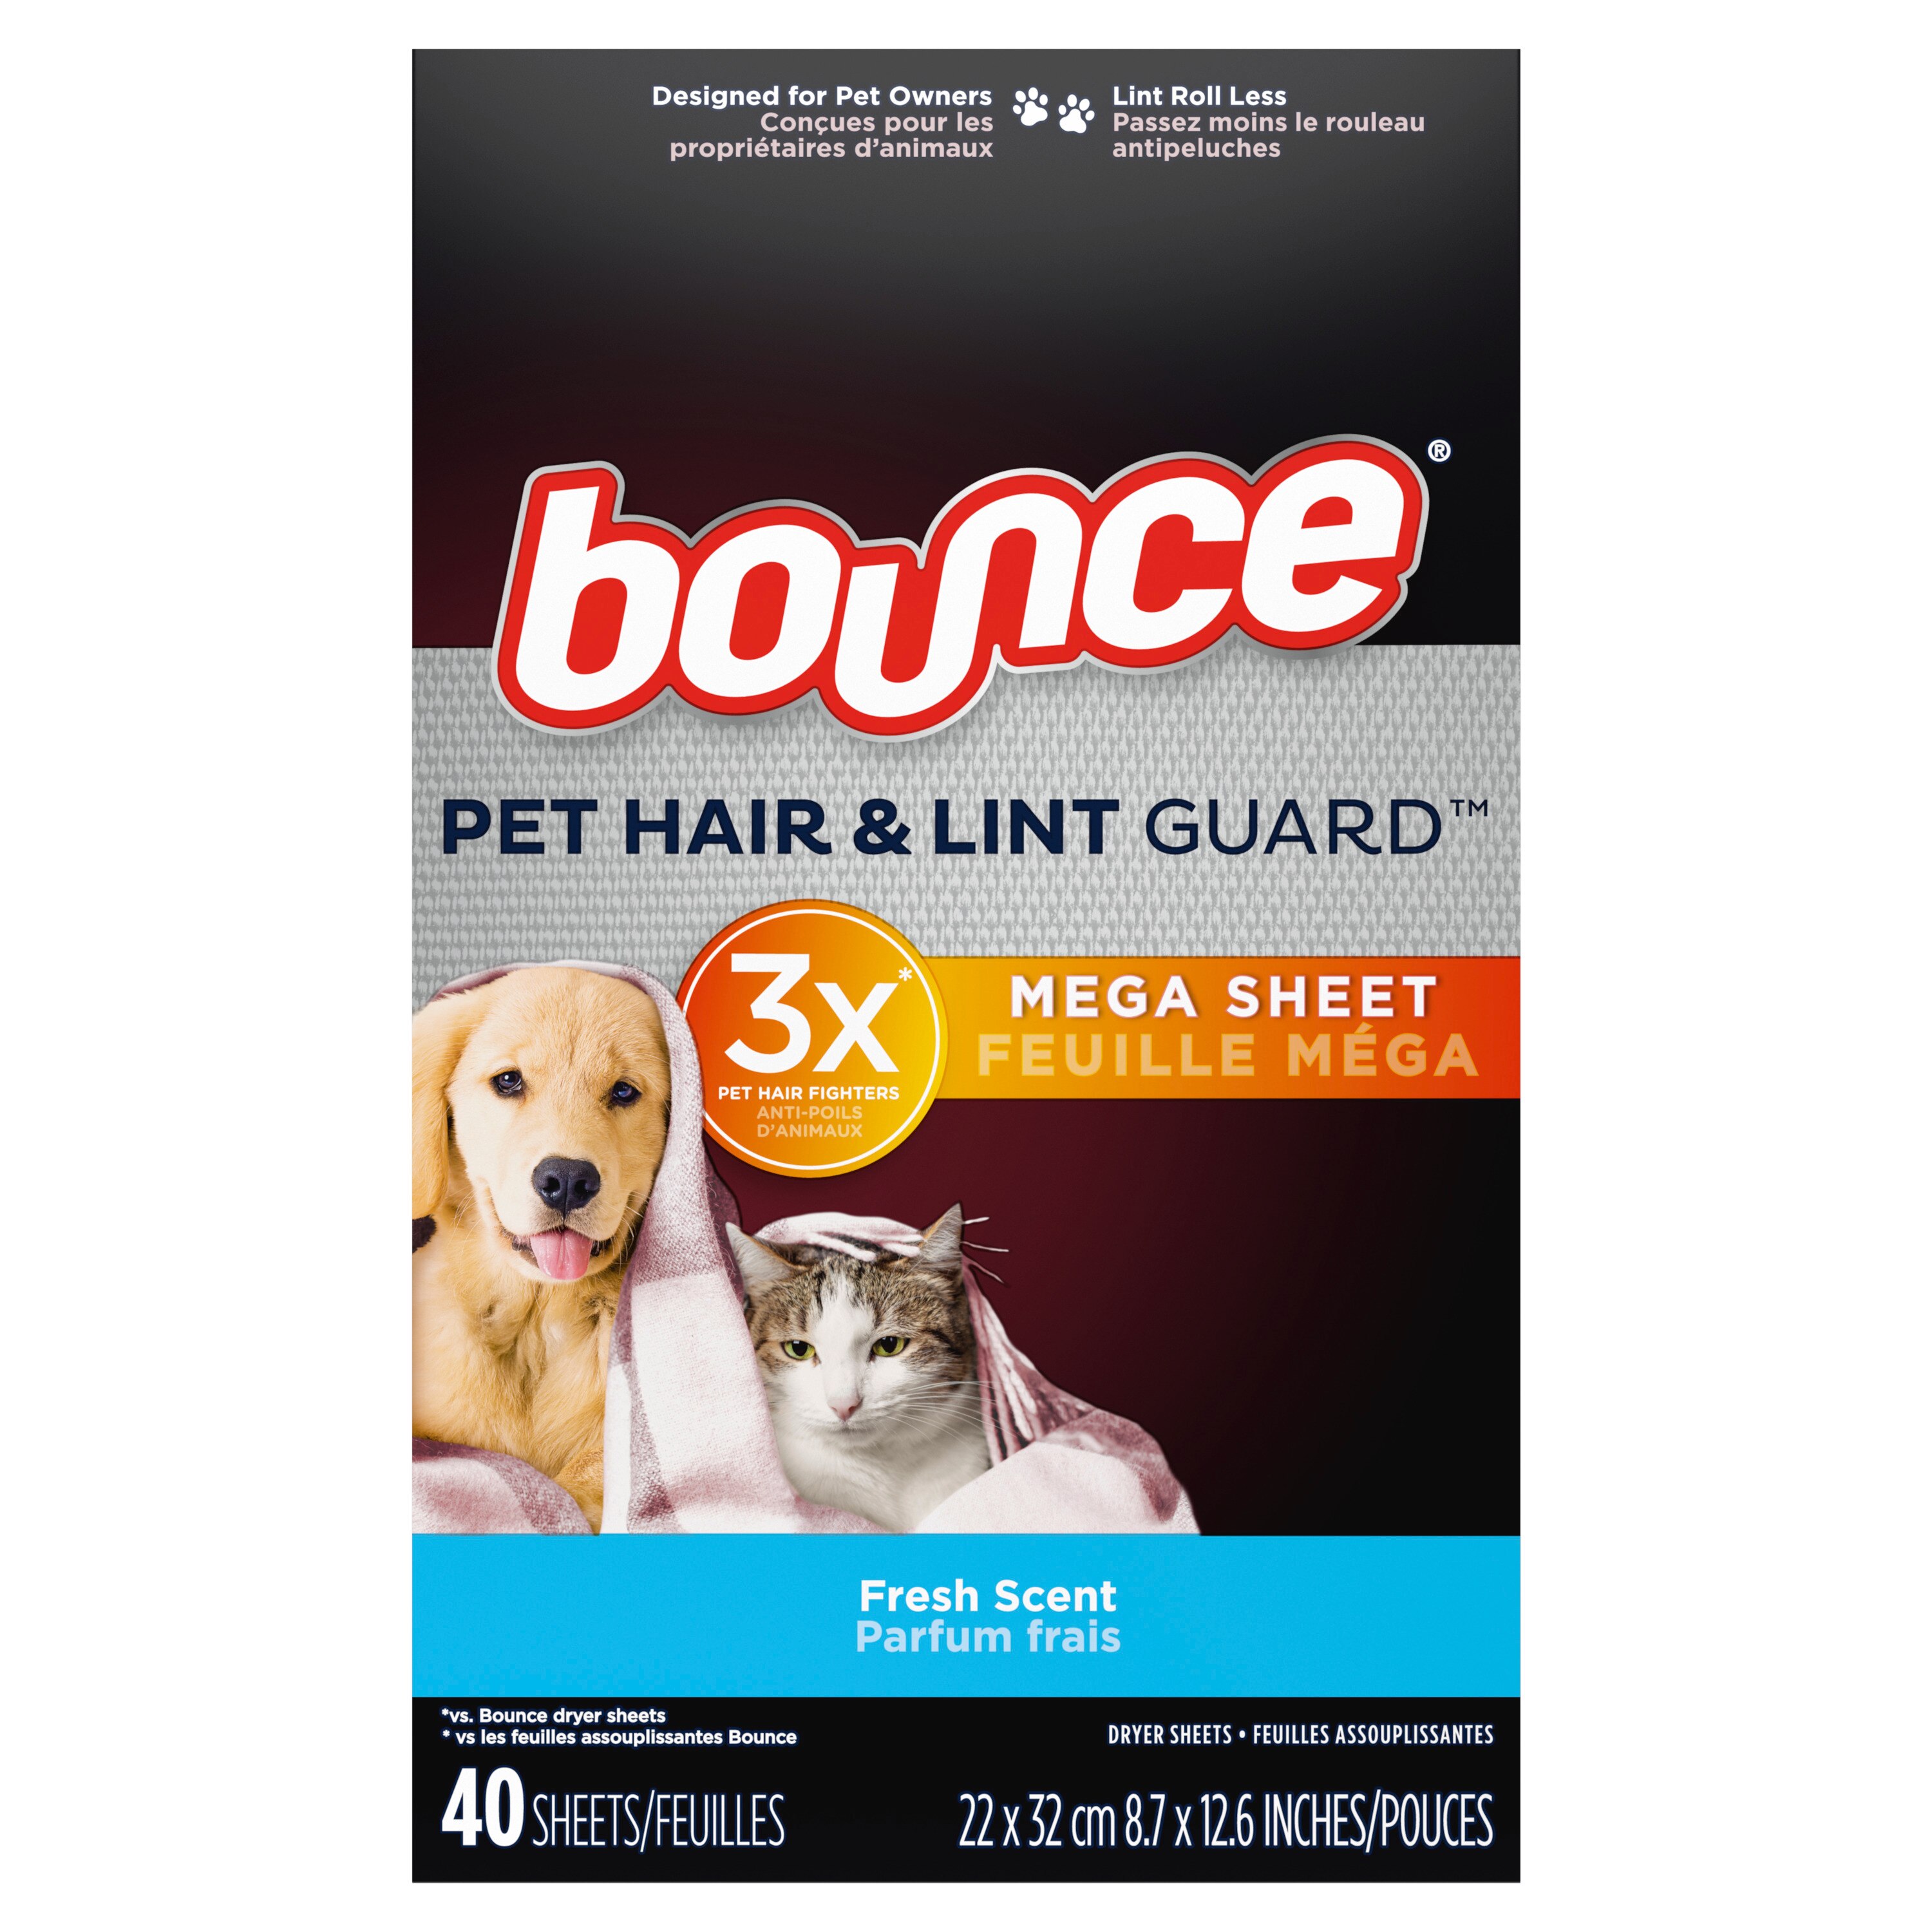 Bounce Pet Hair And Lint Guard Mega Dryer Sheets With 3X Pet Hair Fighters, Fresh Scent, 40 Count - 40 Ct , CVS